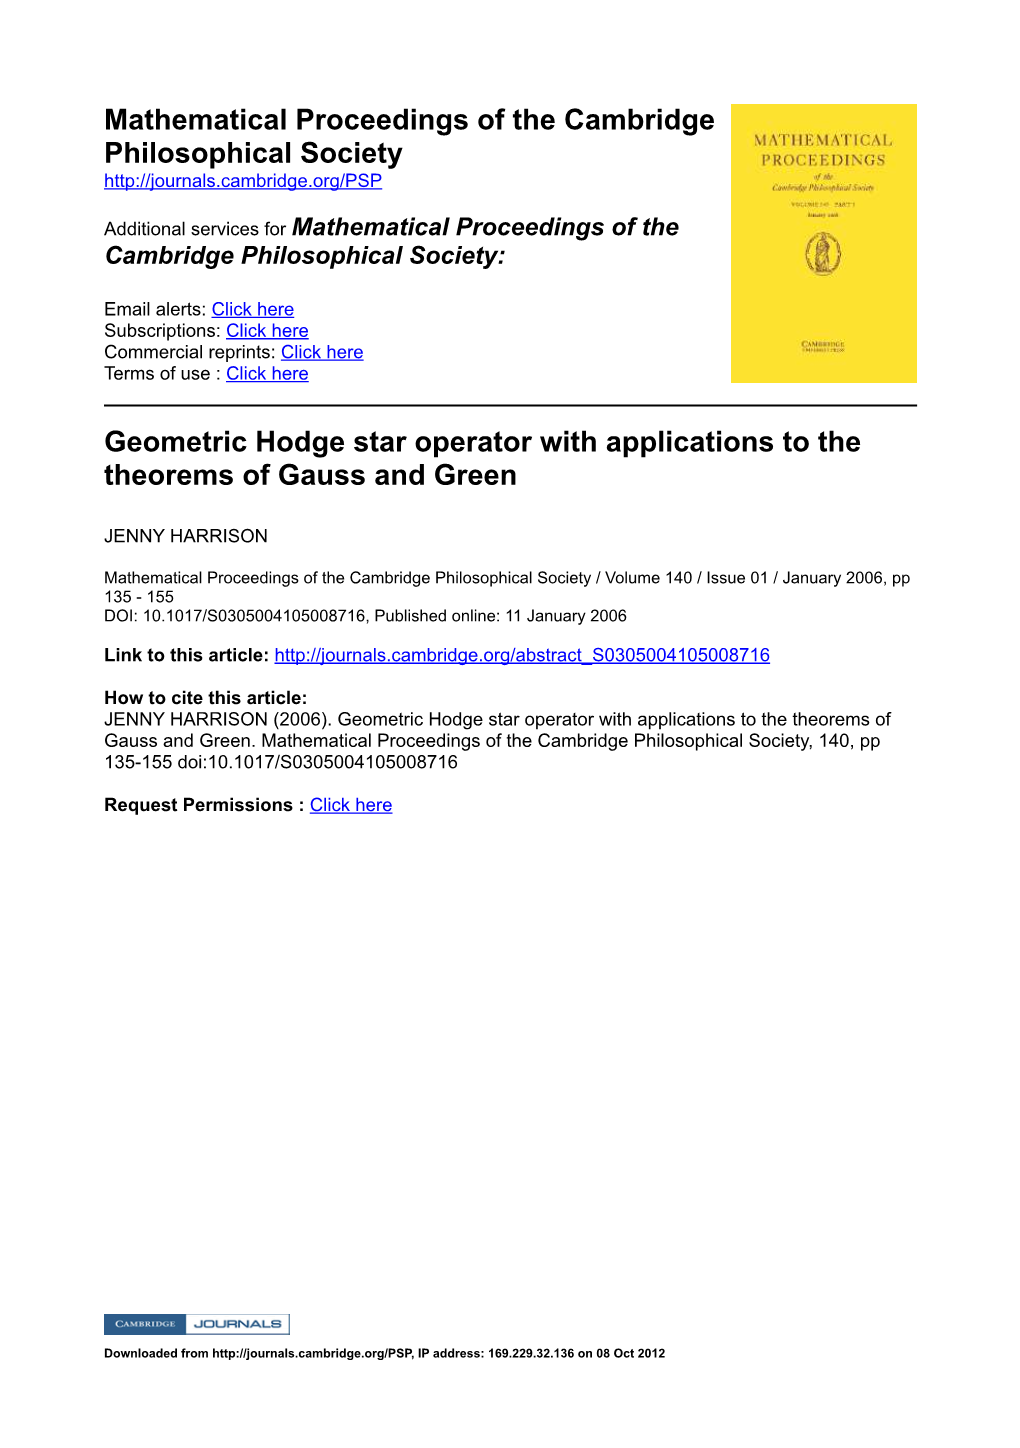 Geometric Hodge * Operator with Applications to Theorems of Gauss